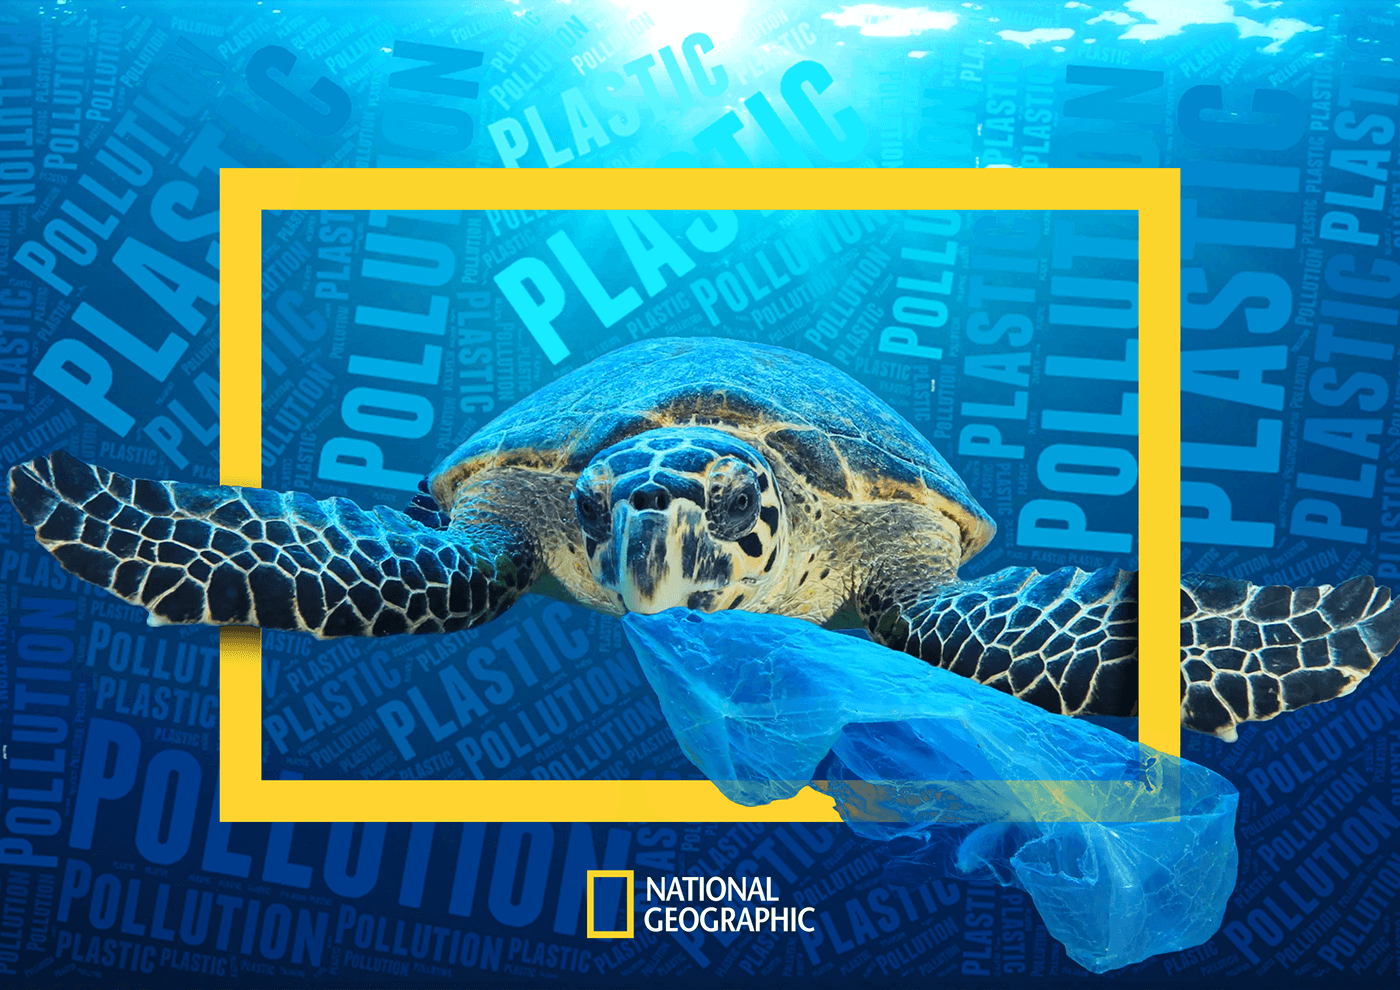 national geographic Nature Turtle Ocean water polution plastic